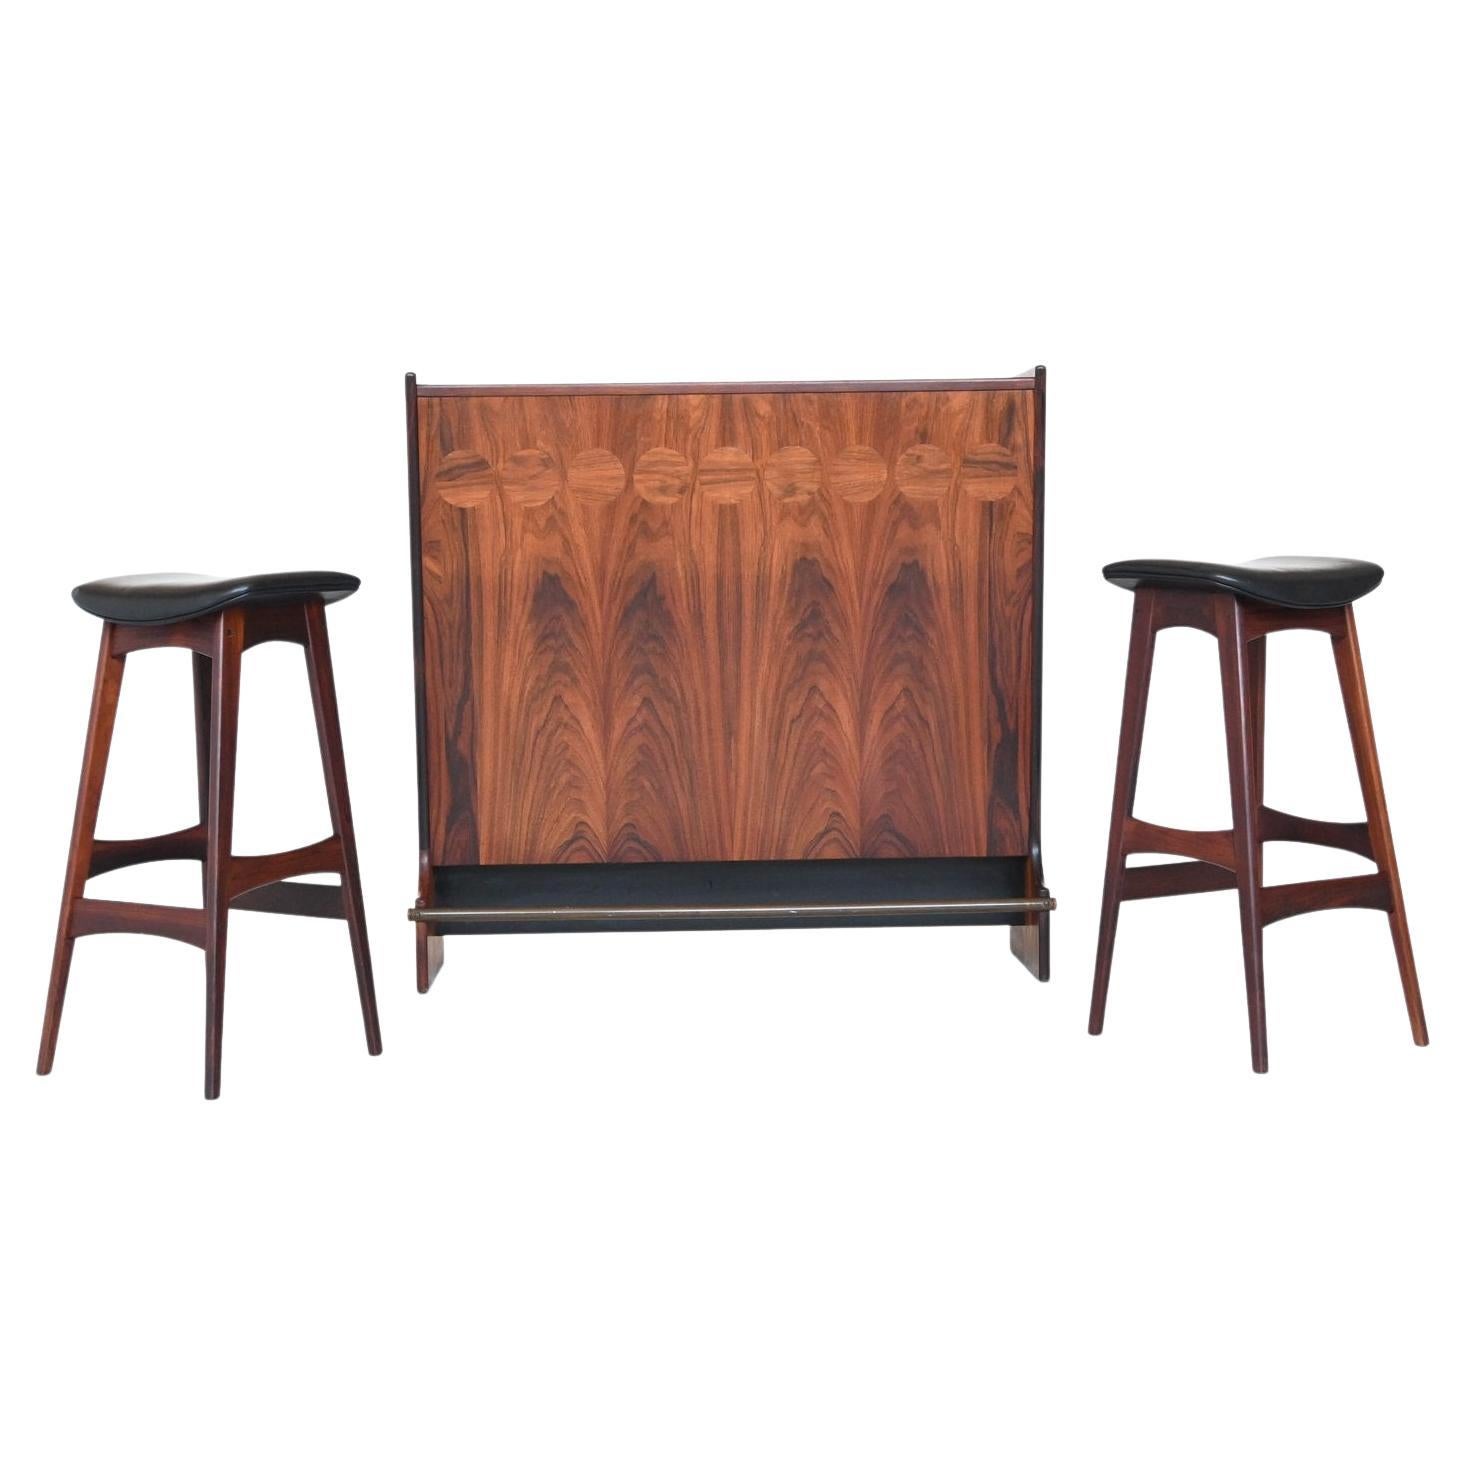 Johannes Andersen Dry Bar and Stools Rosewood Skaaning & Son Denmark 1960